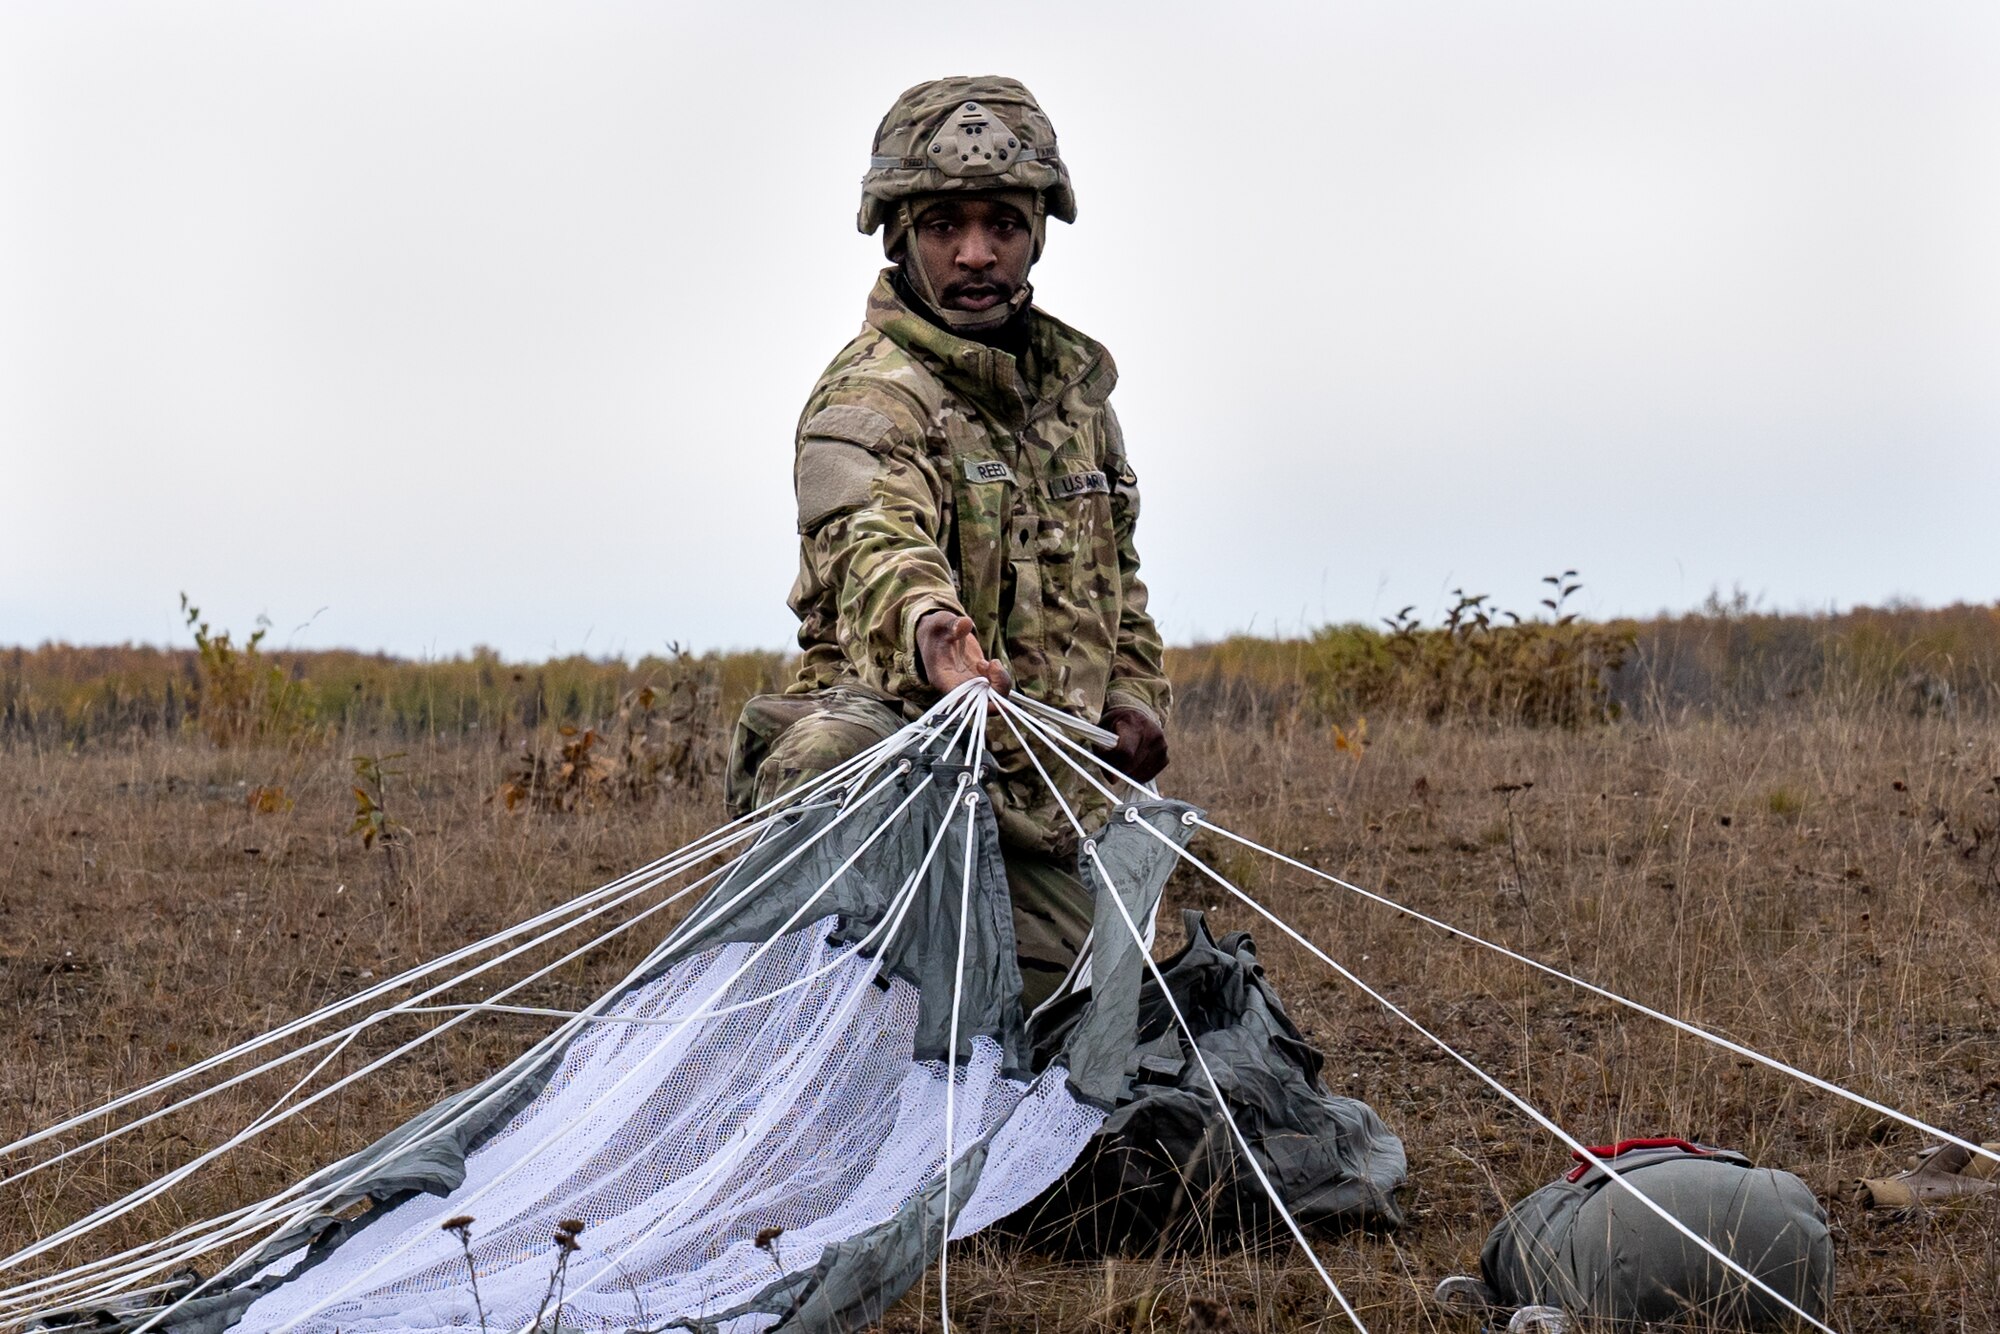 A U.S. Army paratrooper assigned to the 1st Squadron (Airborne), 40th Cavalry Regiment, 4th Infantry Brigade Combat Team (Airborne), 25th Infantry Division, U.S. Army Alaska, recovers his parachute after jumping from a CH-47 Chinook.